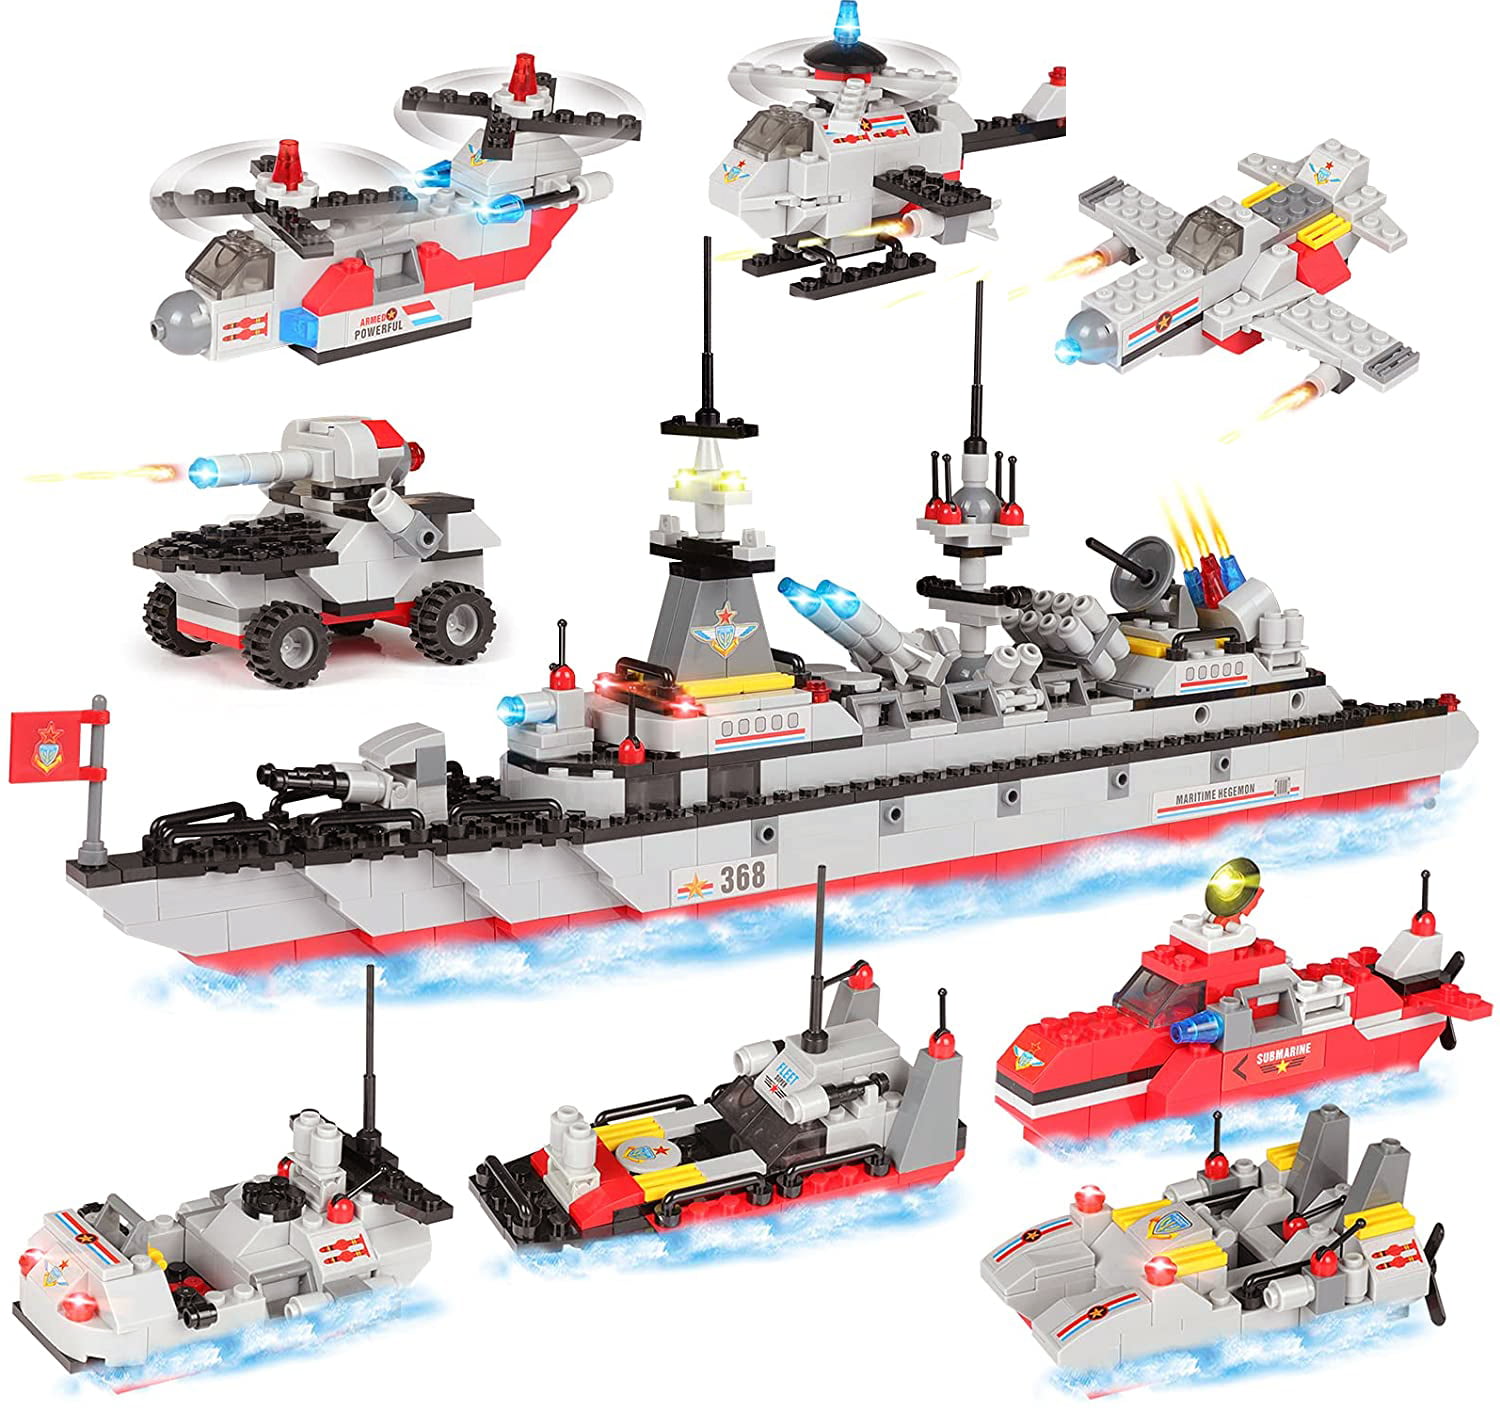 630 PCS STEM Building Kit with Baseplate Ideal Gift for Kids Aged 6+ 2021 Upgrade Military Battleship Building Blocks Kit Missile Cruiser Building Bricks with Army Car Helicopter Patrol Boat